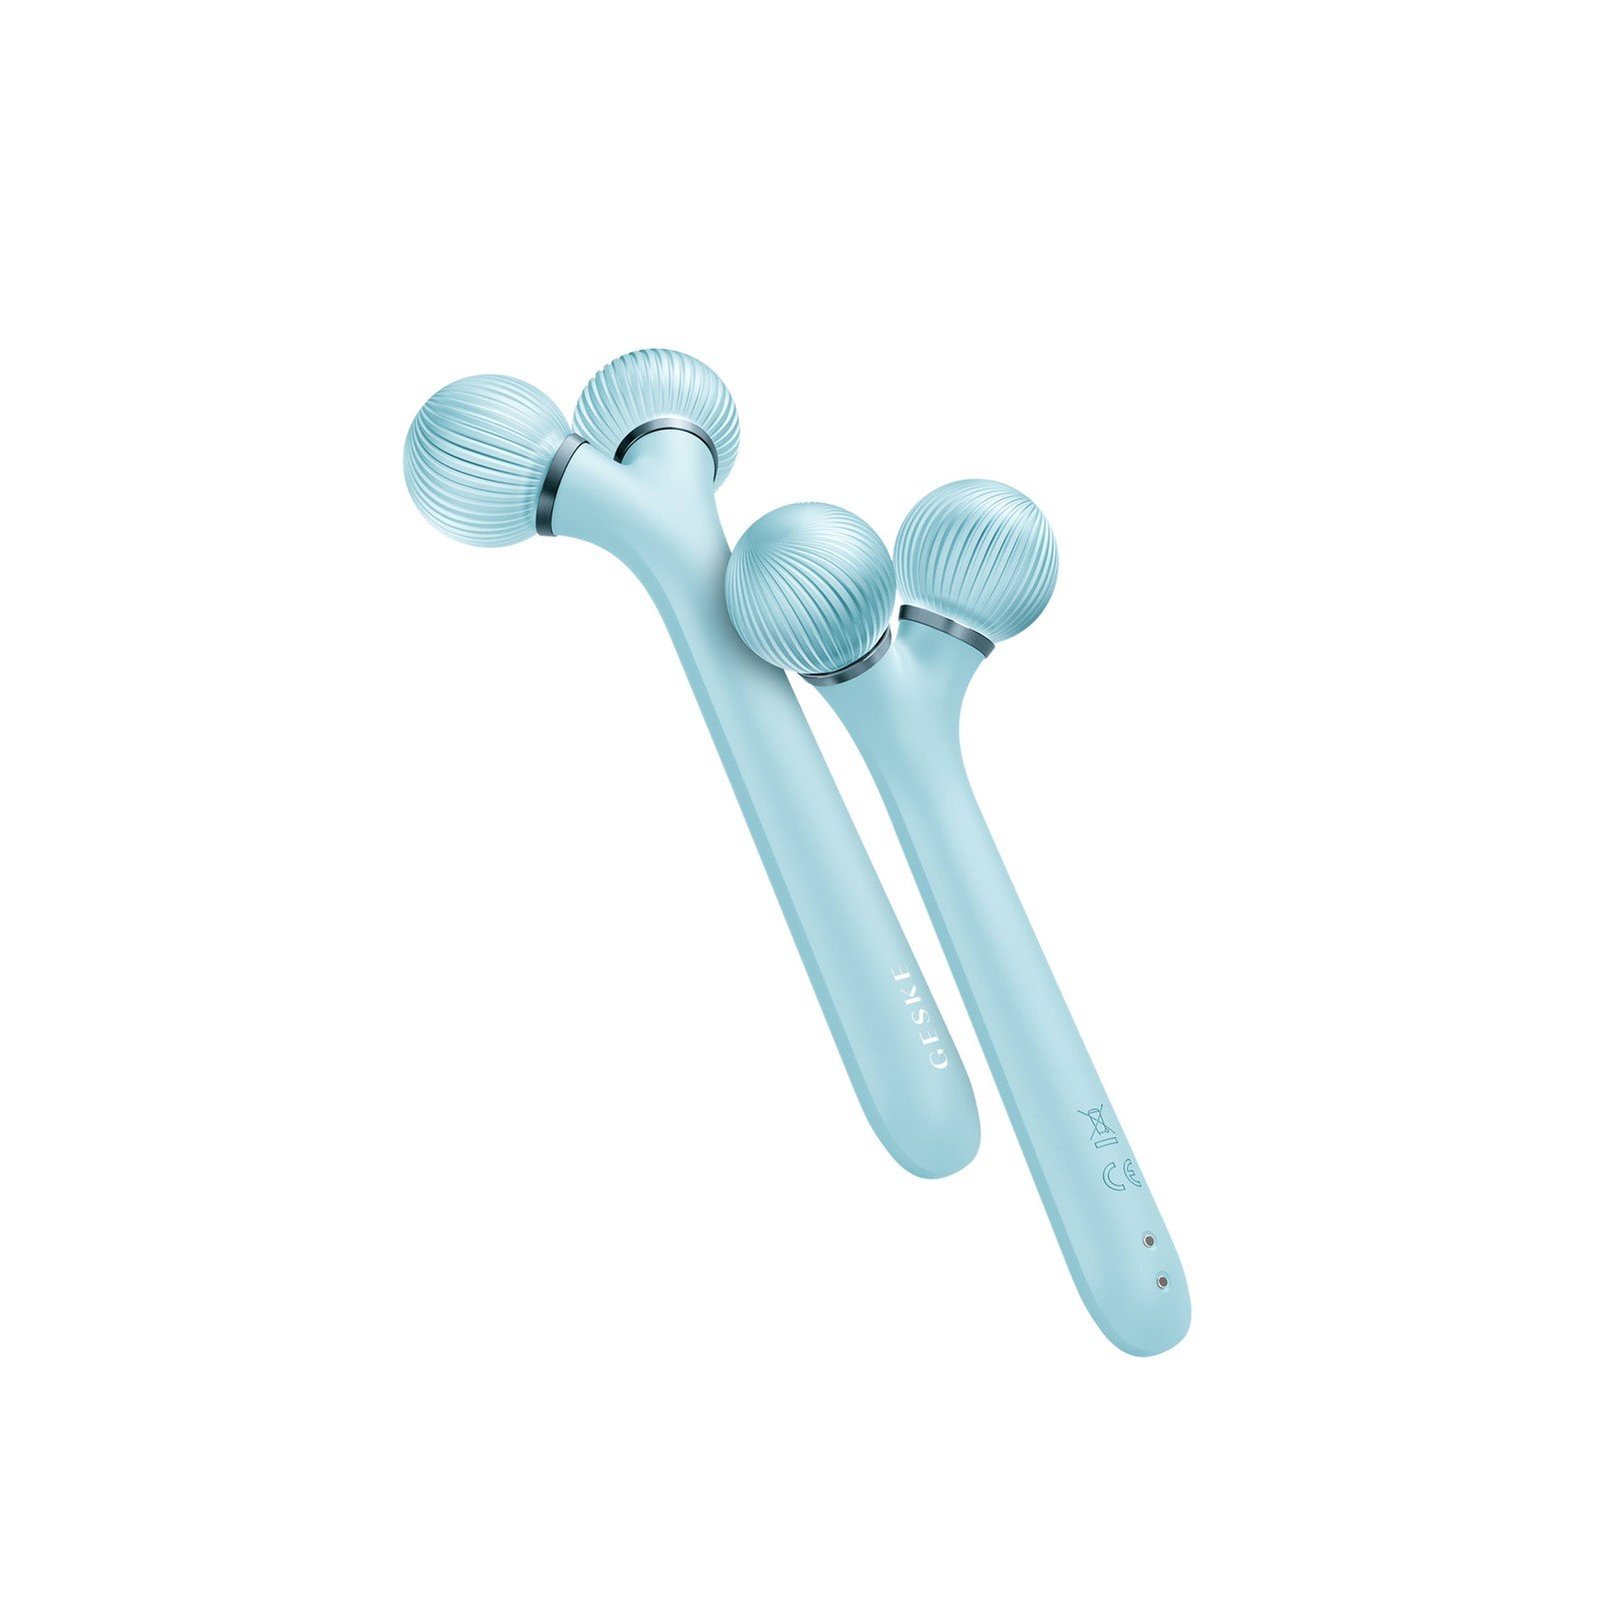 GESKE Sonic Facial Roller 4-In-1 Turquoise